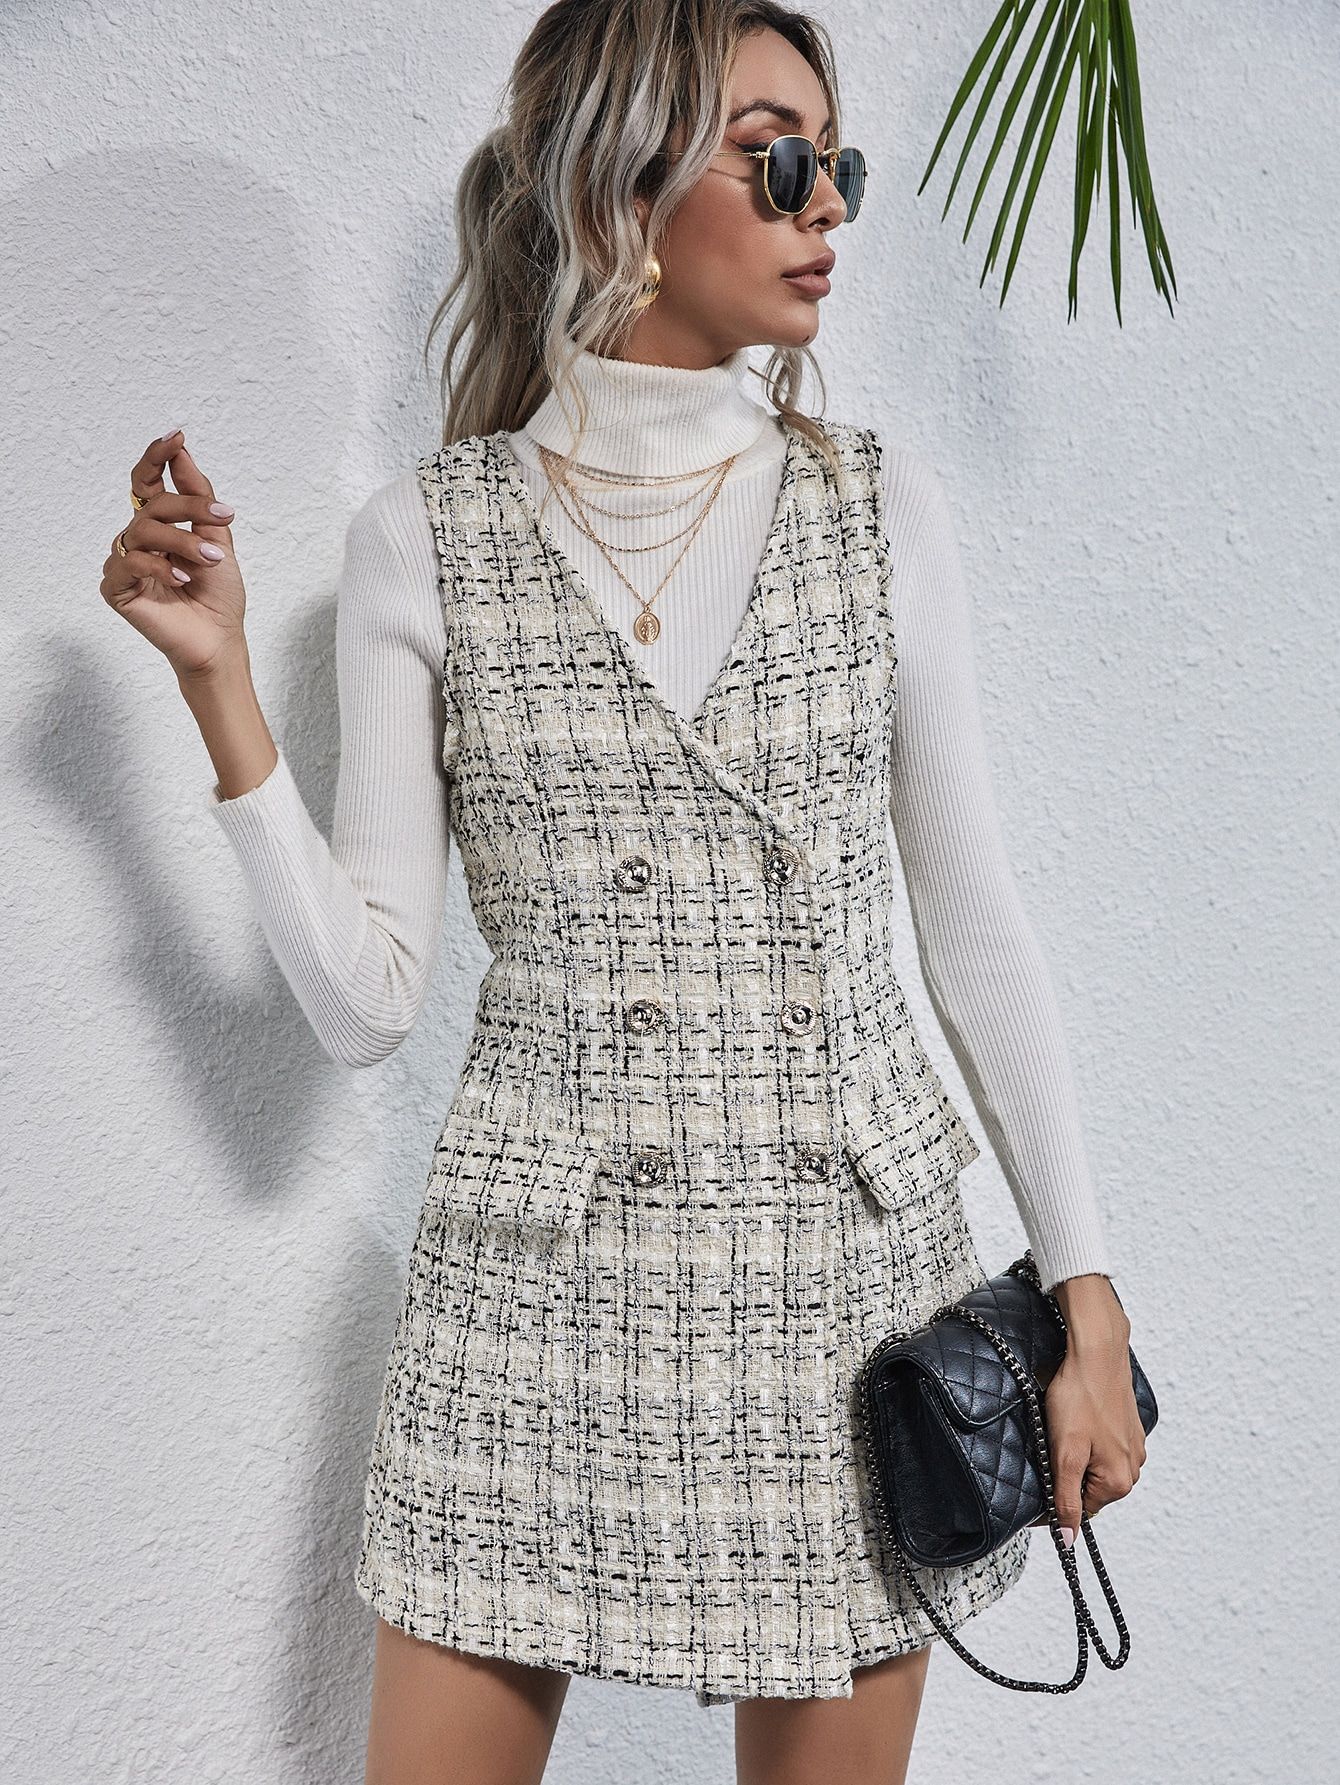 Timeless Classic: Step Out in Style with a Tweed Dress